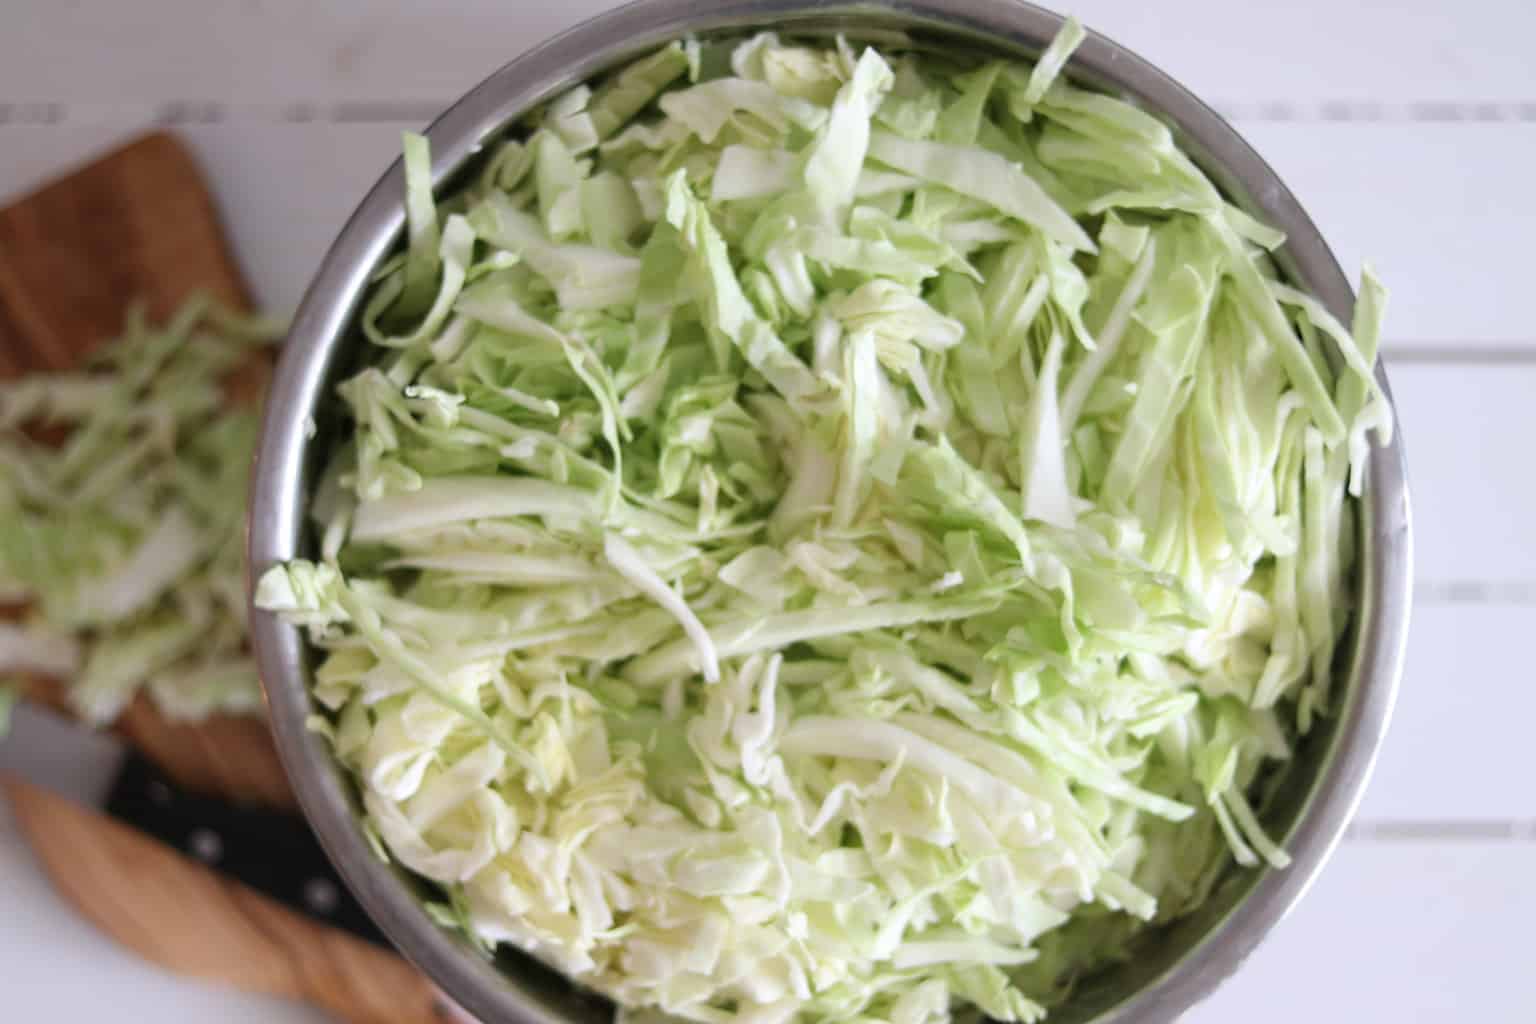 Shredded cabbage in large bowl.